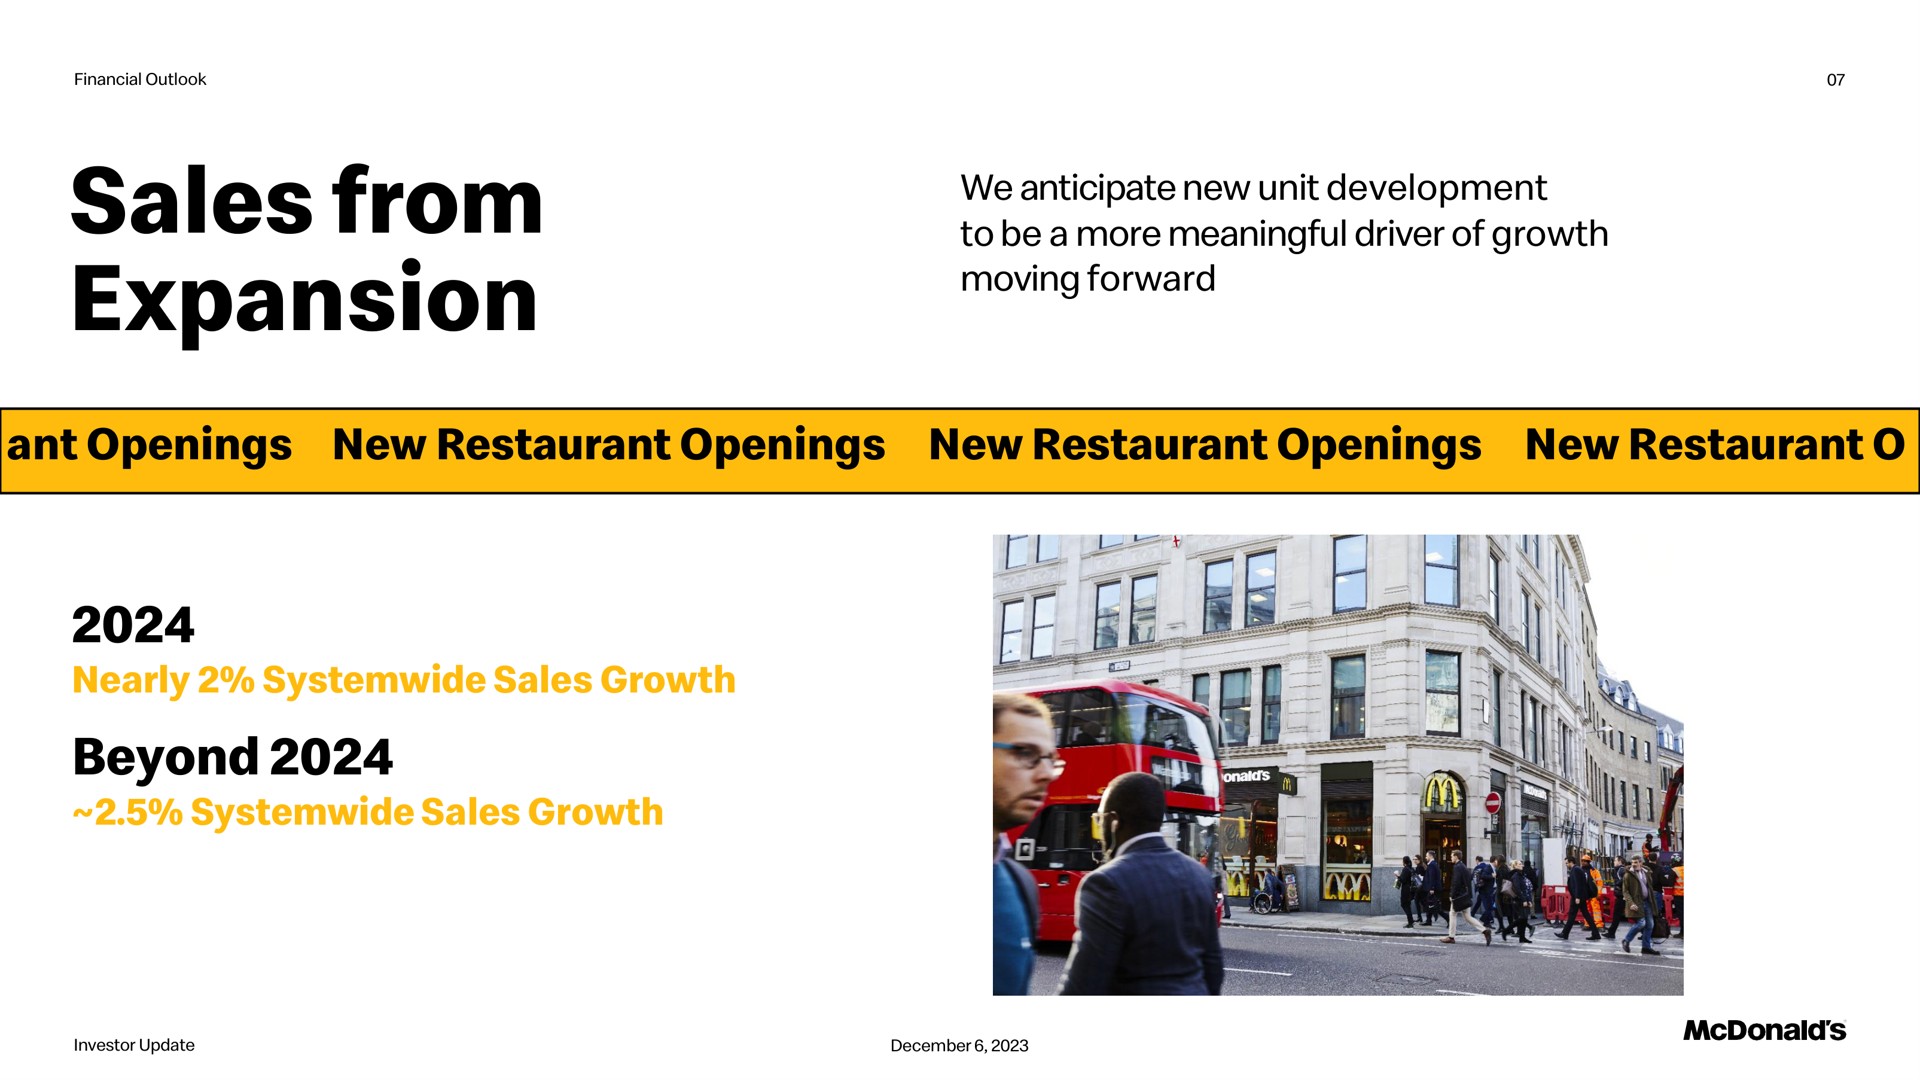 sales from expansion we anticipate new unit development to be a more meaningful driver of growth moving forward ant openings new restaurant openings new restaurant openings new restaurant nearly sales growth beyond sales growth fro | McDonald's